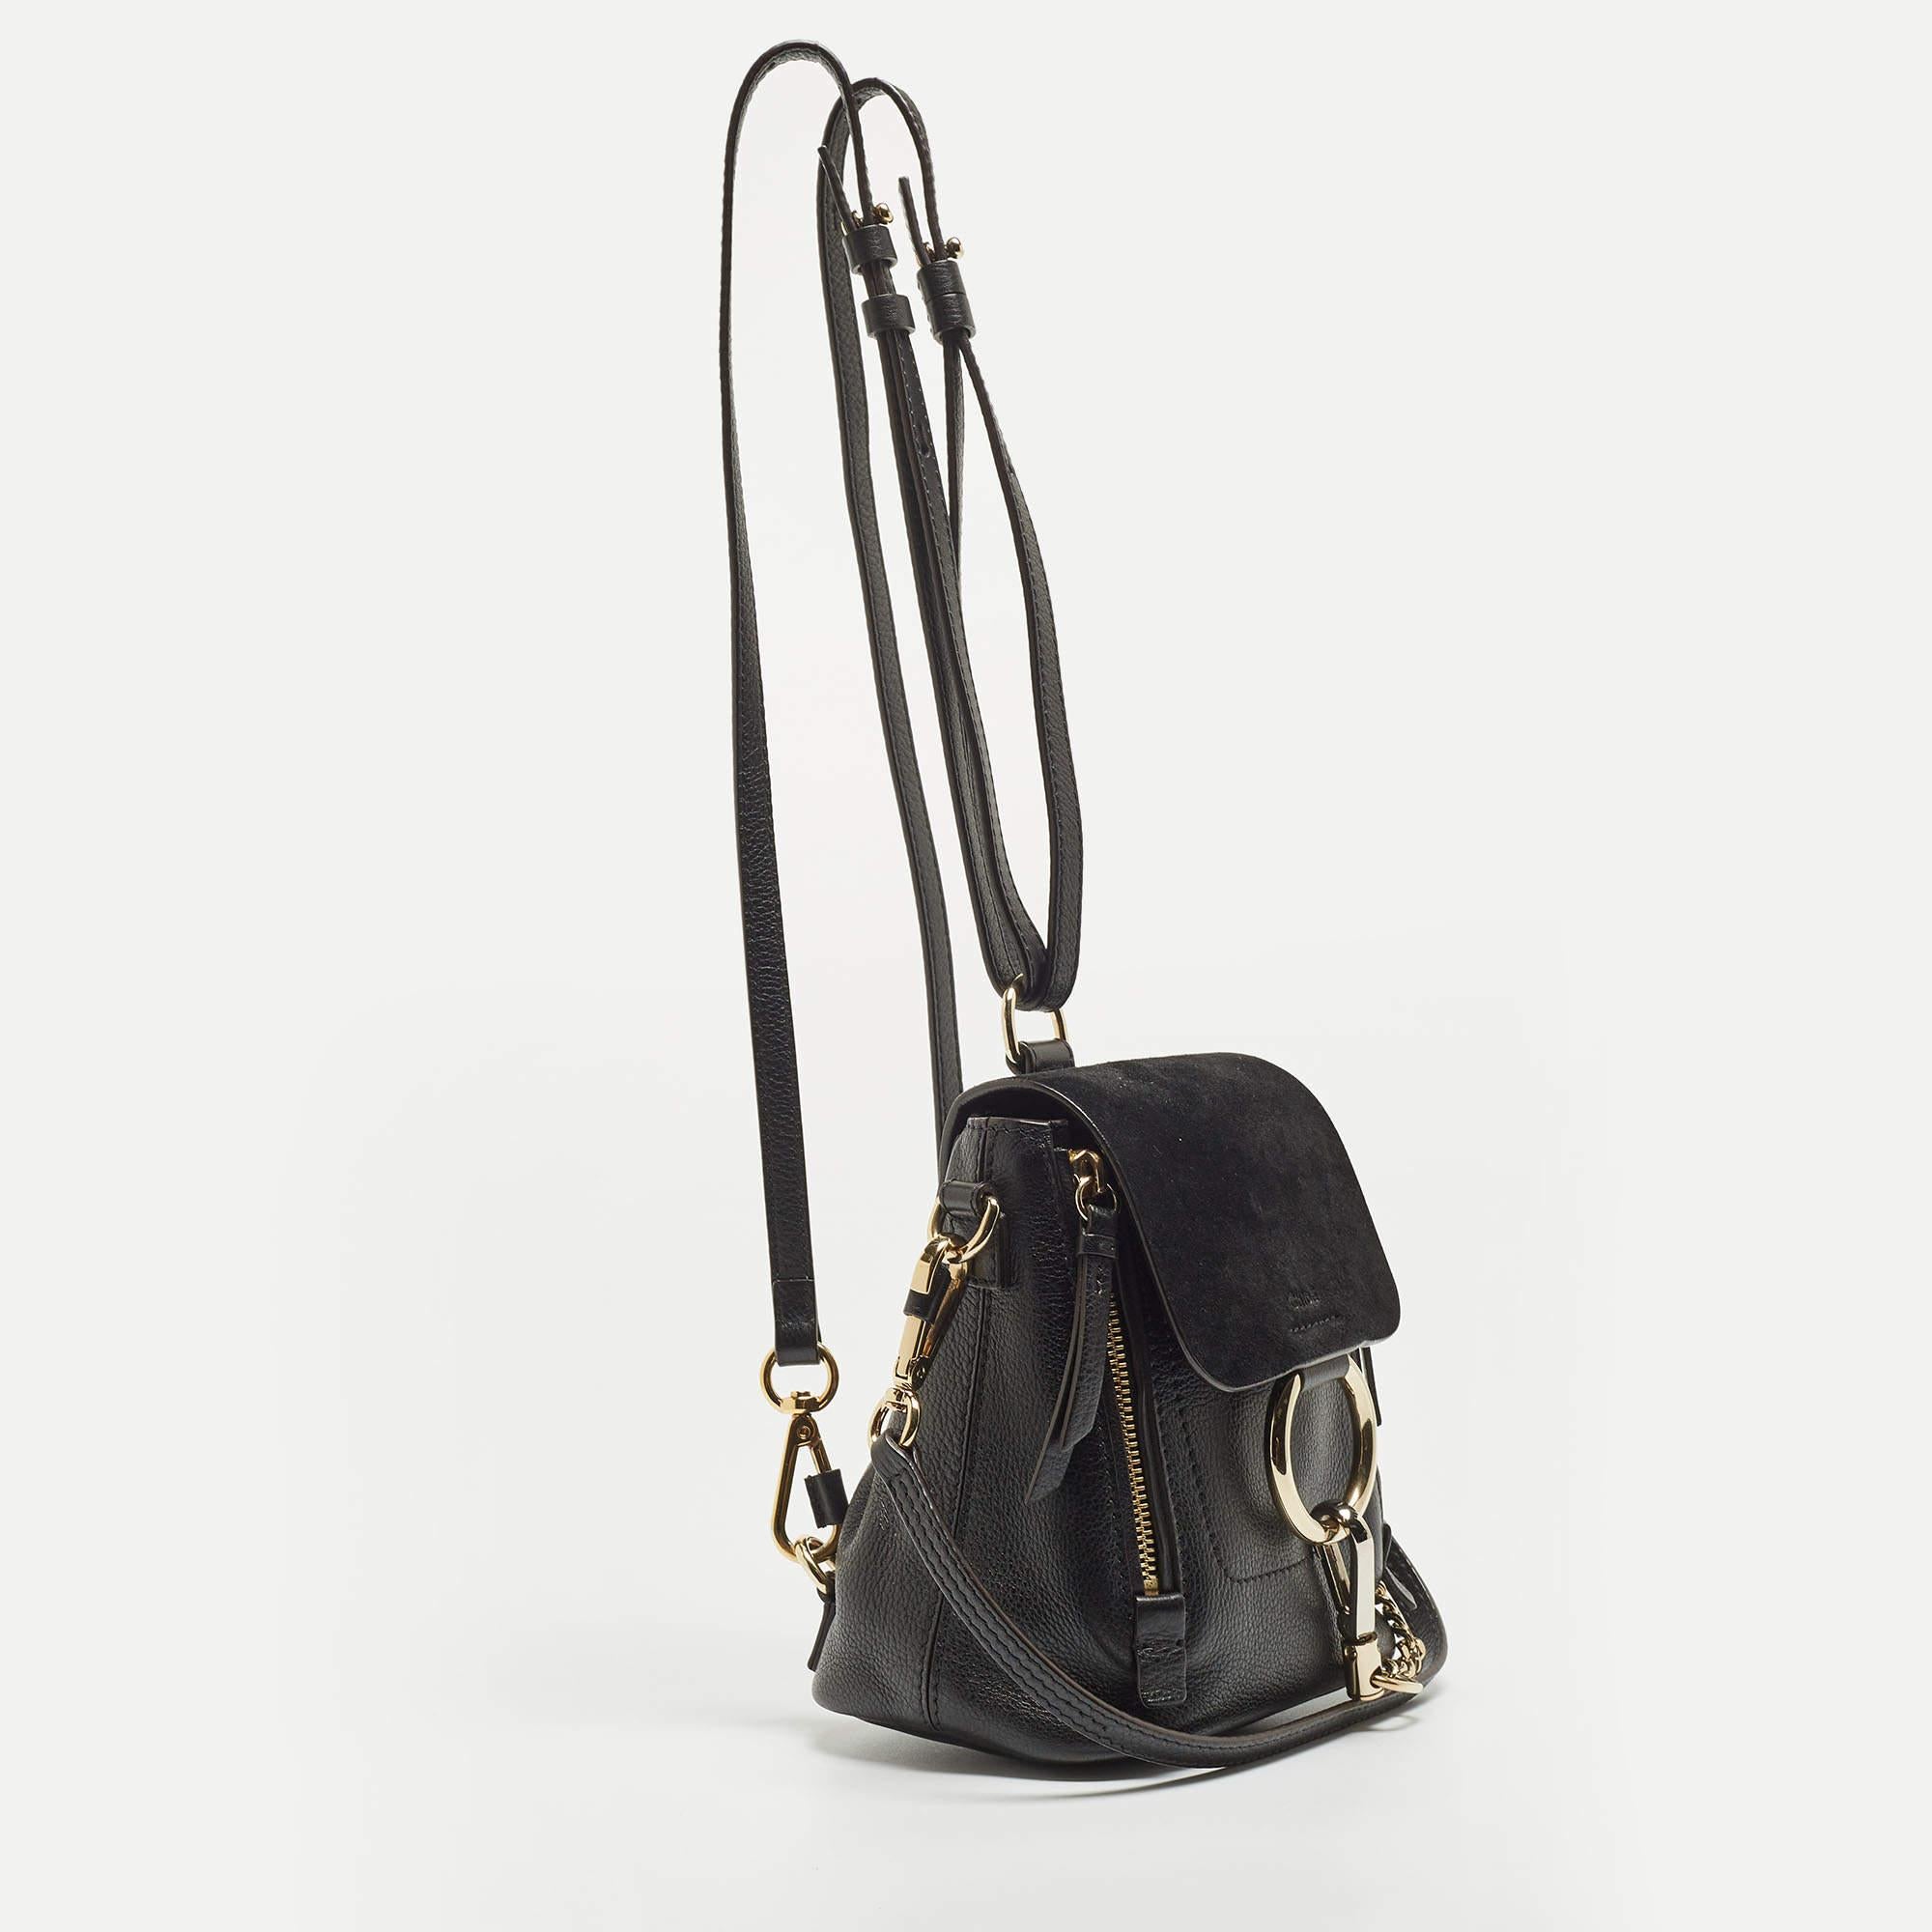 You are going to love owning this Faye Day backpack from Chloe as it is well-made and brimming with luxury. The bag has been crafted from leather and designed with a suede flap that comes with the signature ring and chain in gold-tone metal. It